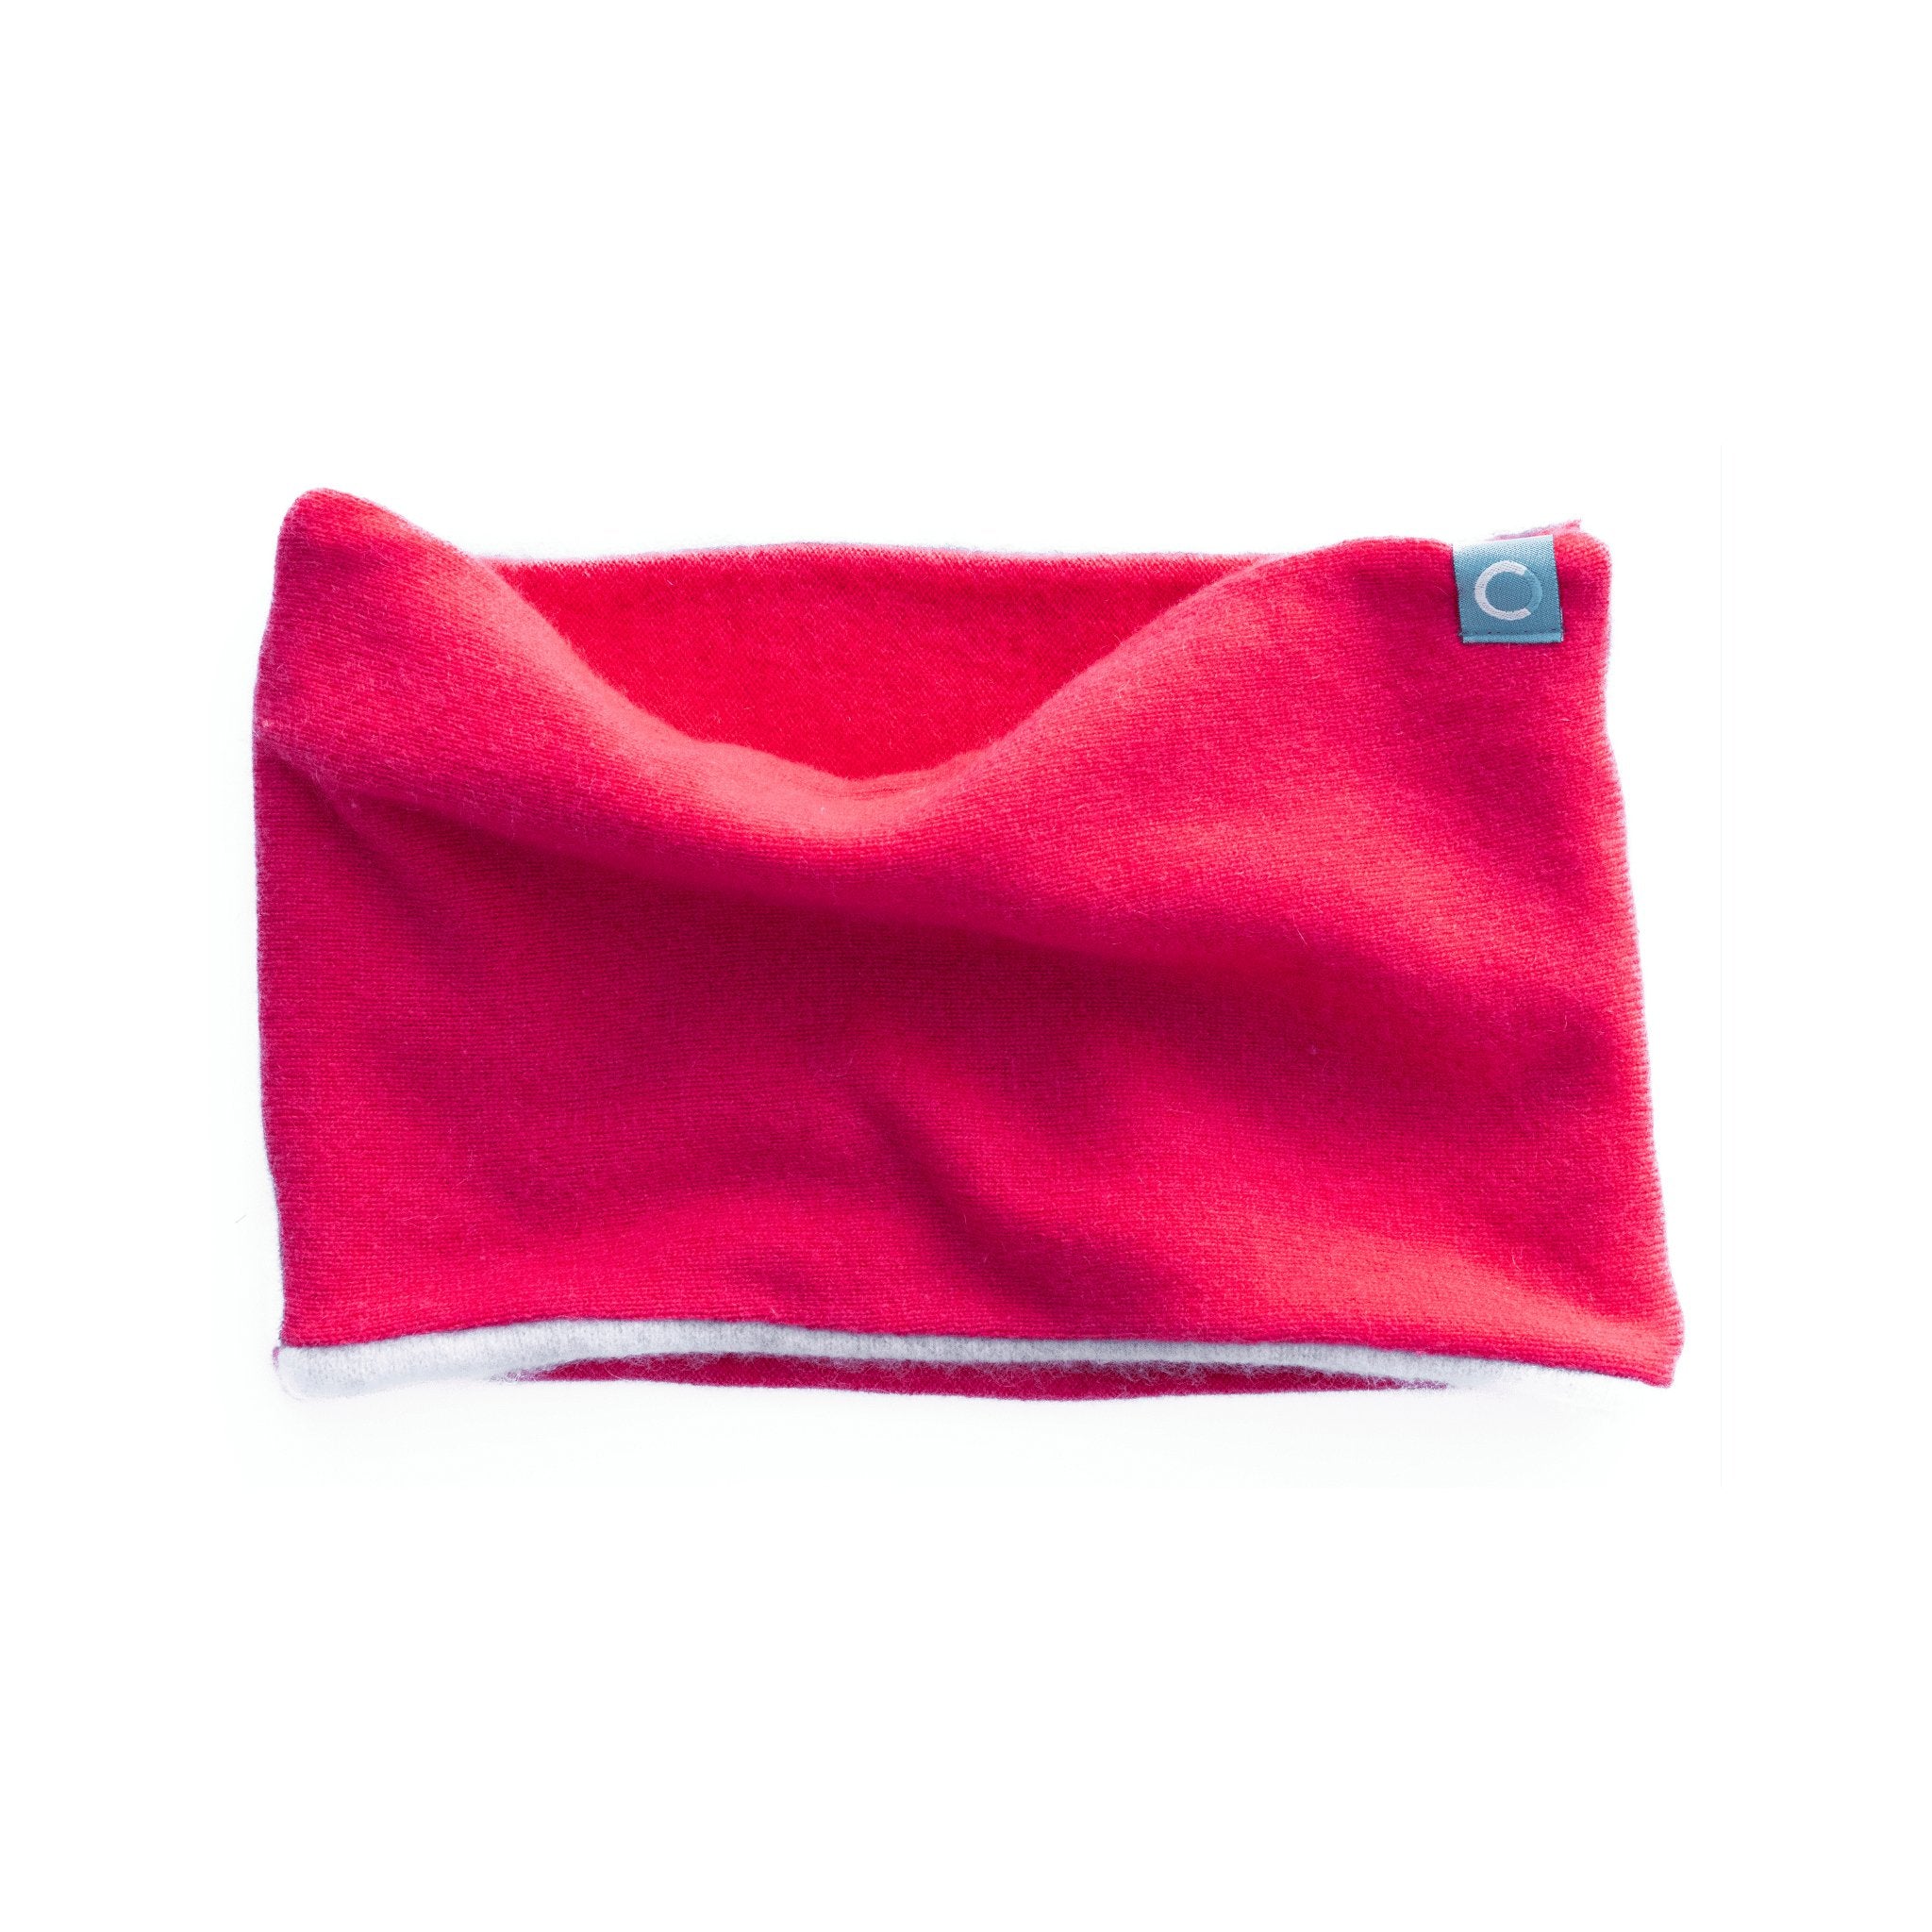 Recycled Neckwarmers | Large - Pinks & Sparkle - Cashmere Circle